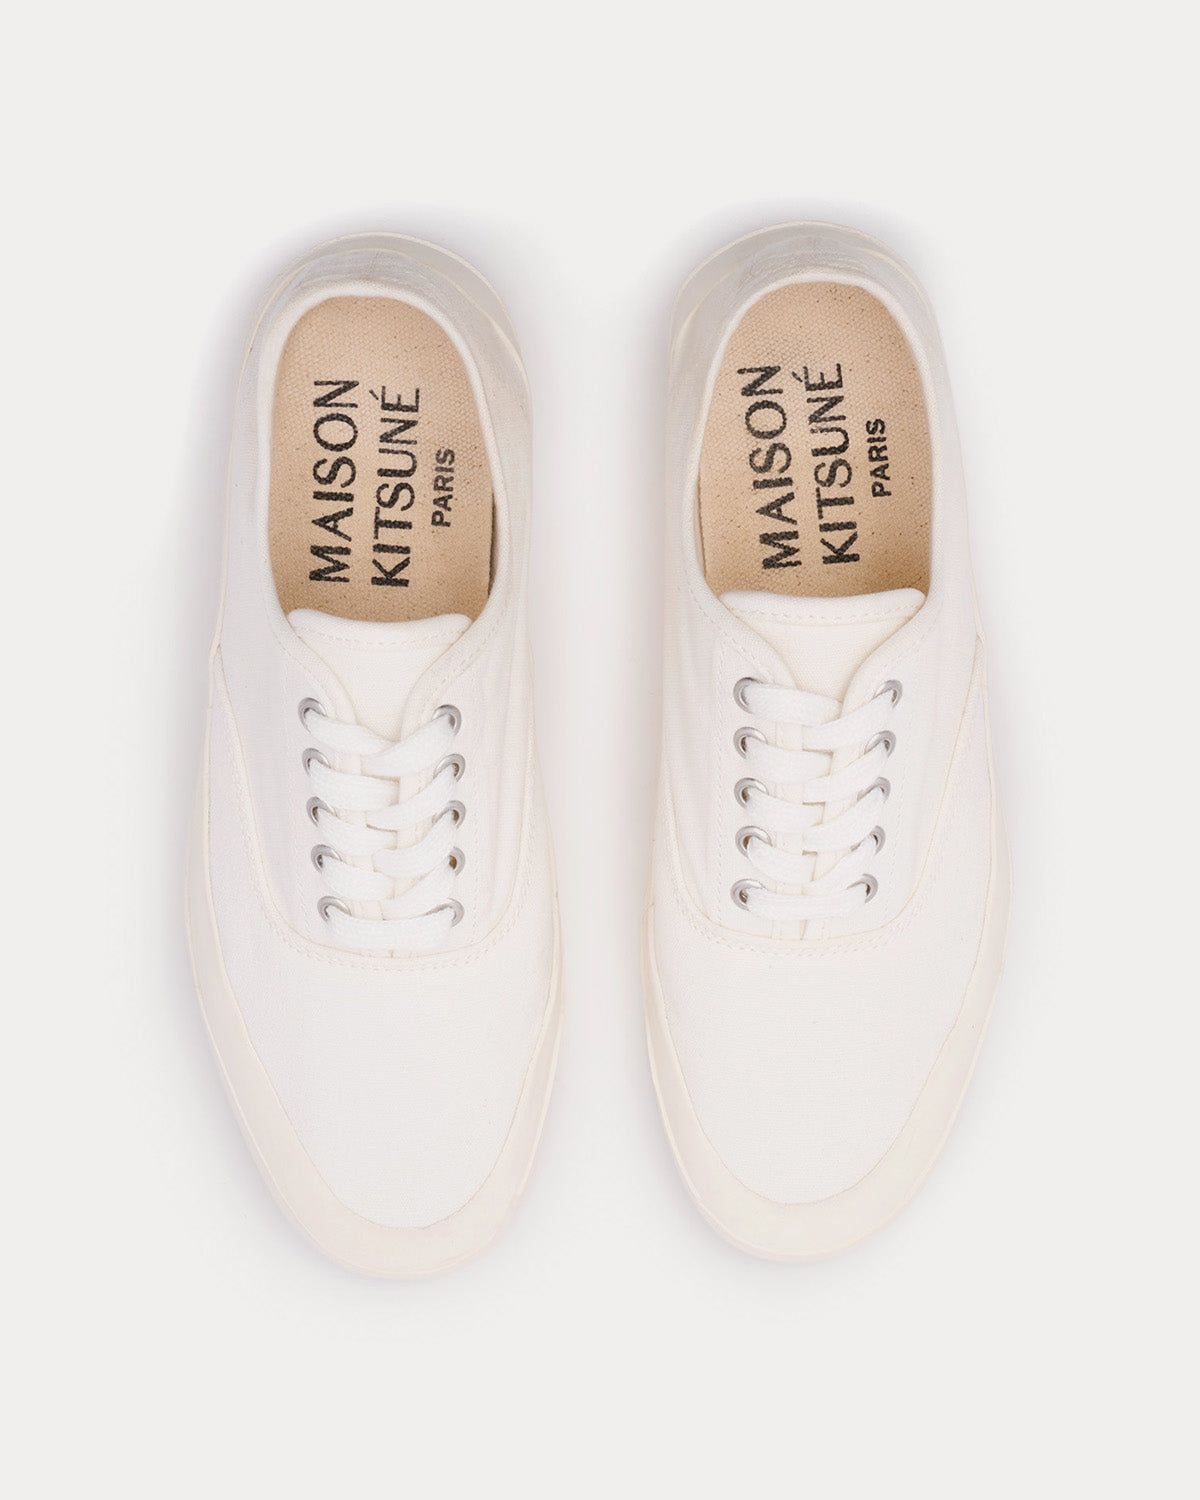 Maison Kitsuné - MK Printed Sole Laced Canvas White Low Top Sneakers